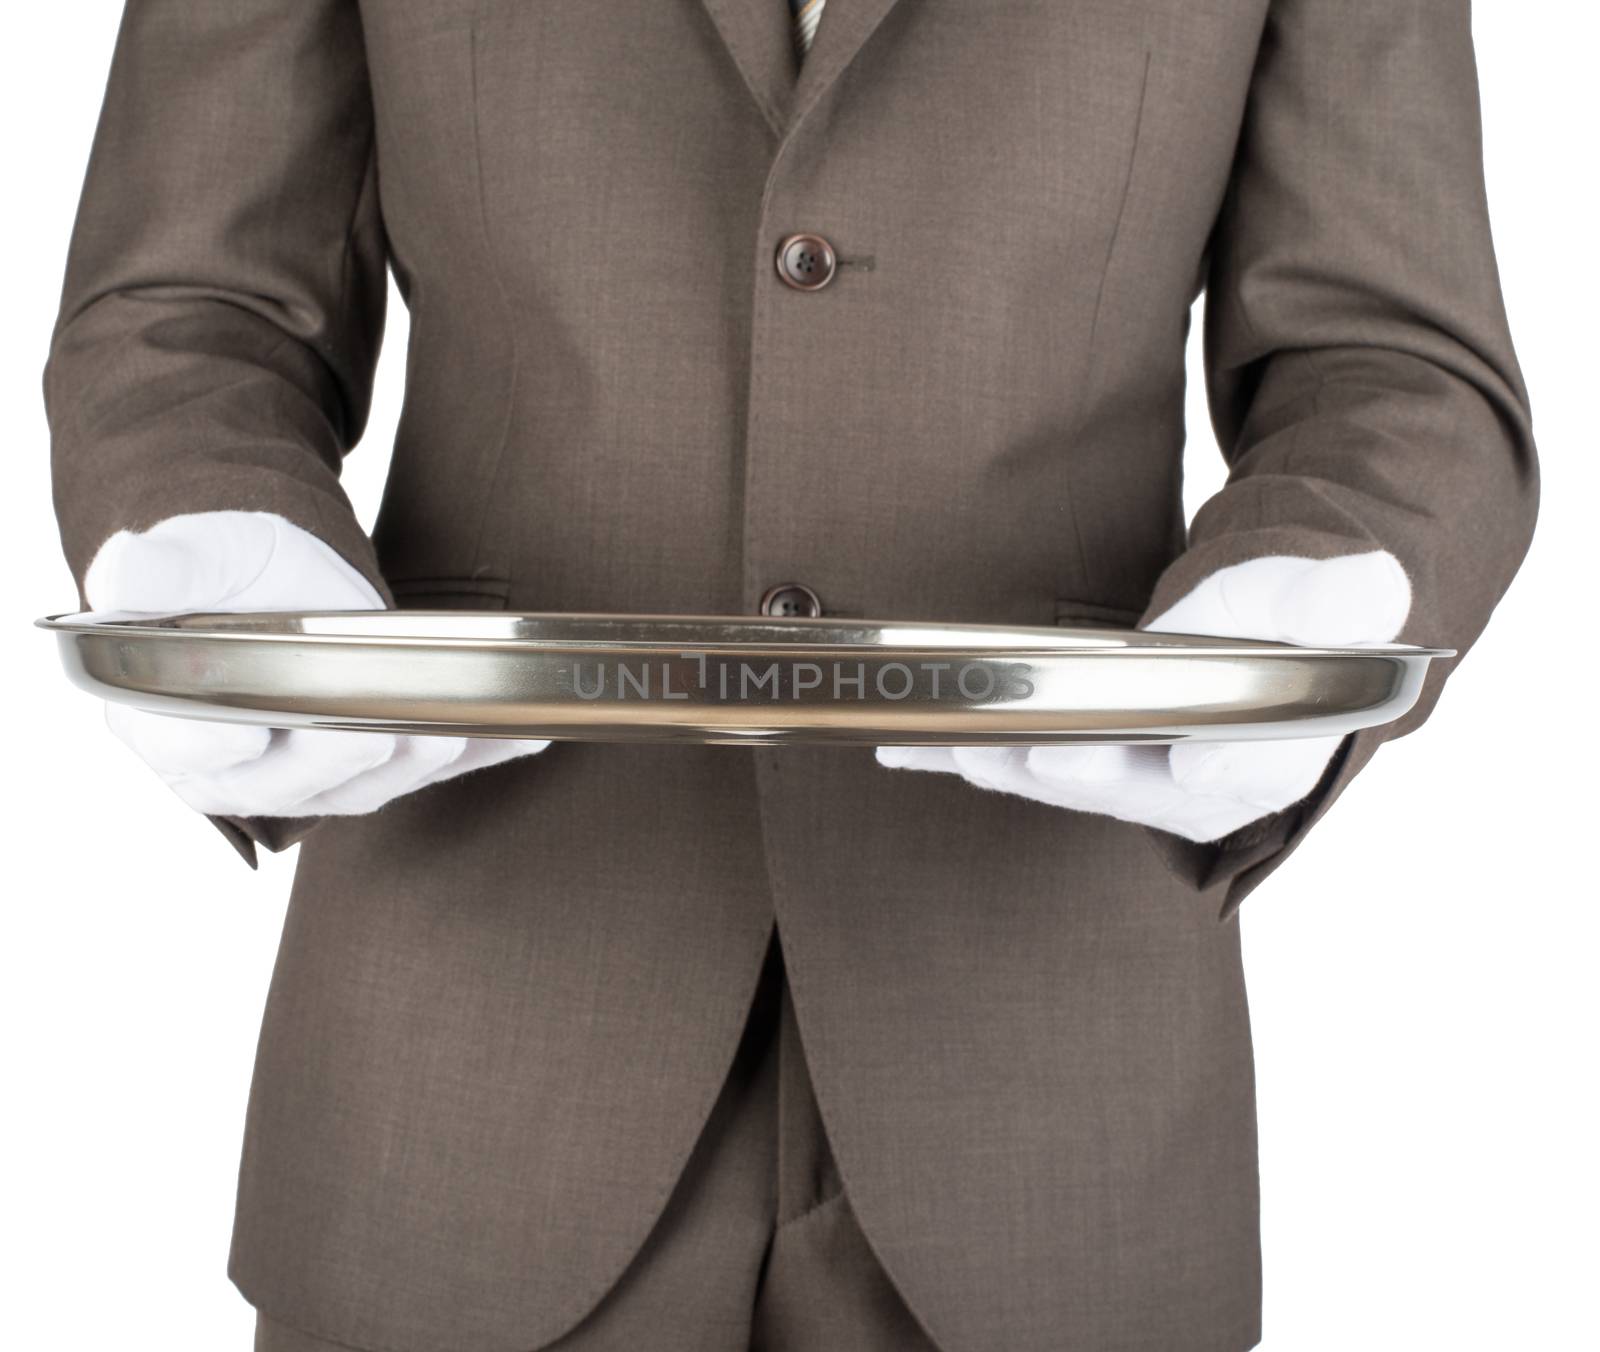 Waiter holding empty silver tray over white background